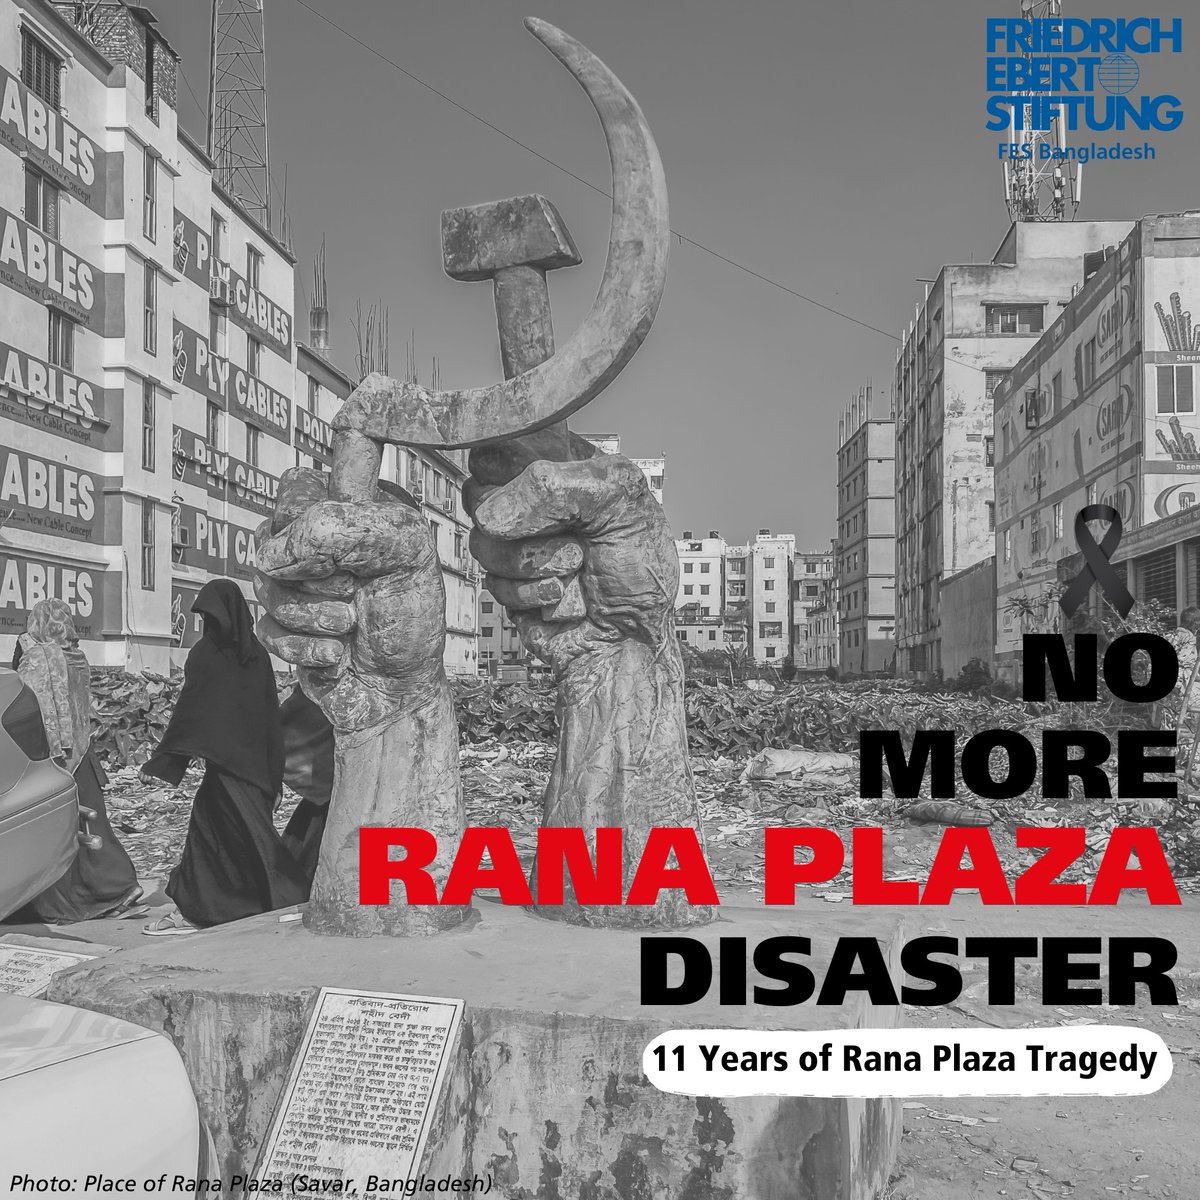 Today marks the 11th year since the devastating Rana Plaza tragedy. We solemnly remember the 1,134 lives lost in the Rana Plaza tragedy. As we reflect, let us not forget the crucial lessons from this deadliest tragedy.